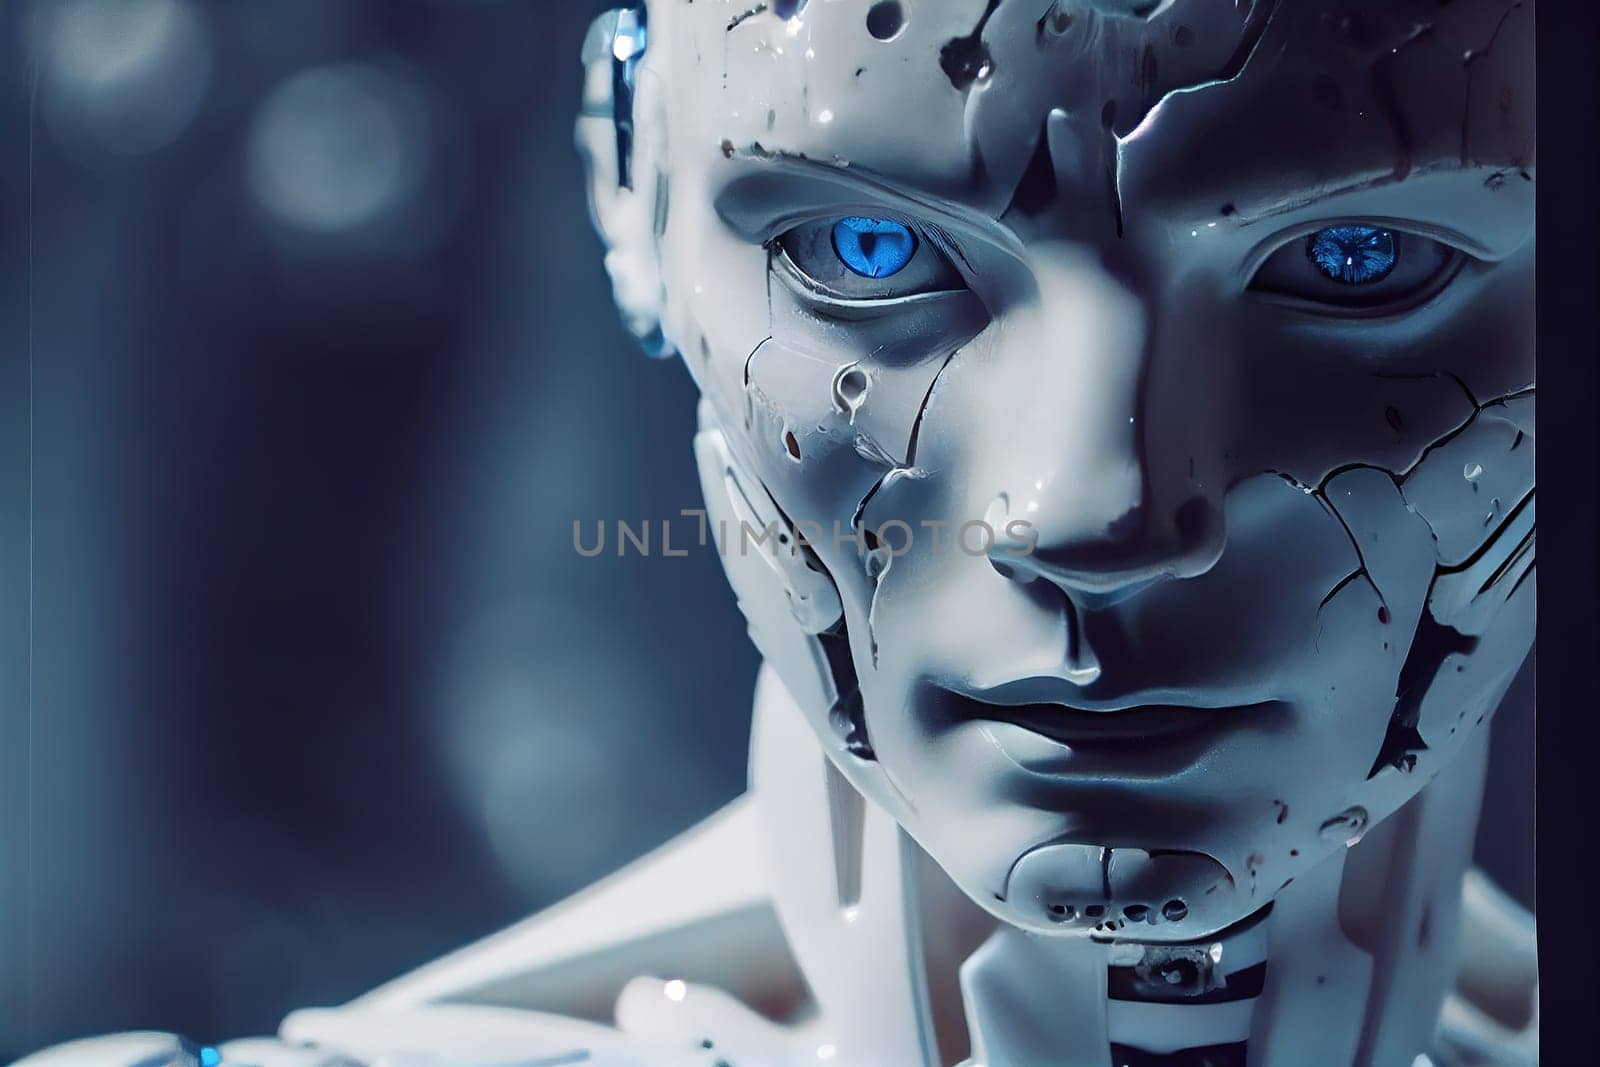 Wondrous hyper realistic closeup portrait artificial intelligent humanoid robot still in skeleton stage assemble in android factory. Advanced bionic and robotic engineering technology by generative AI